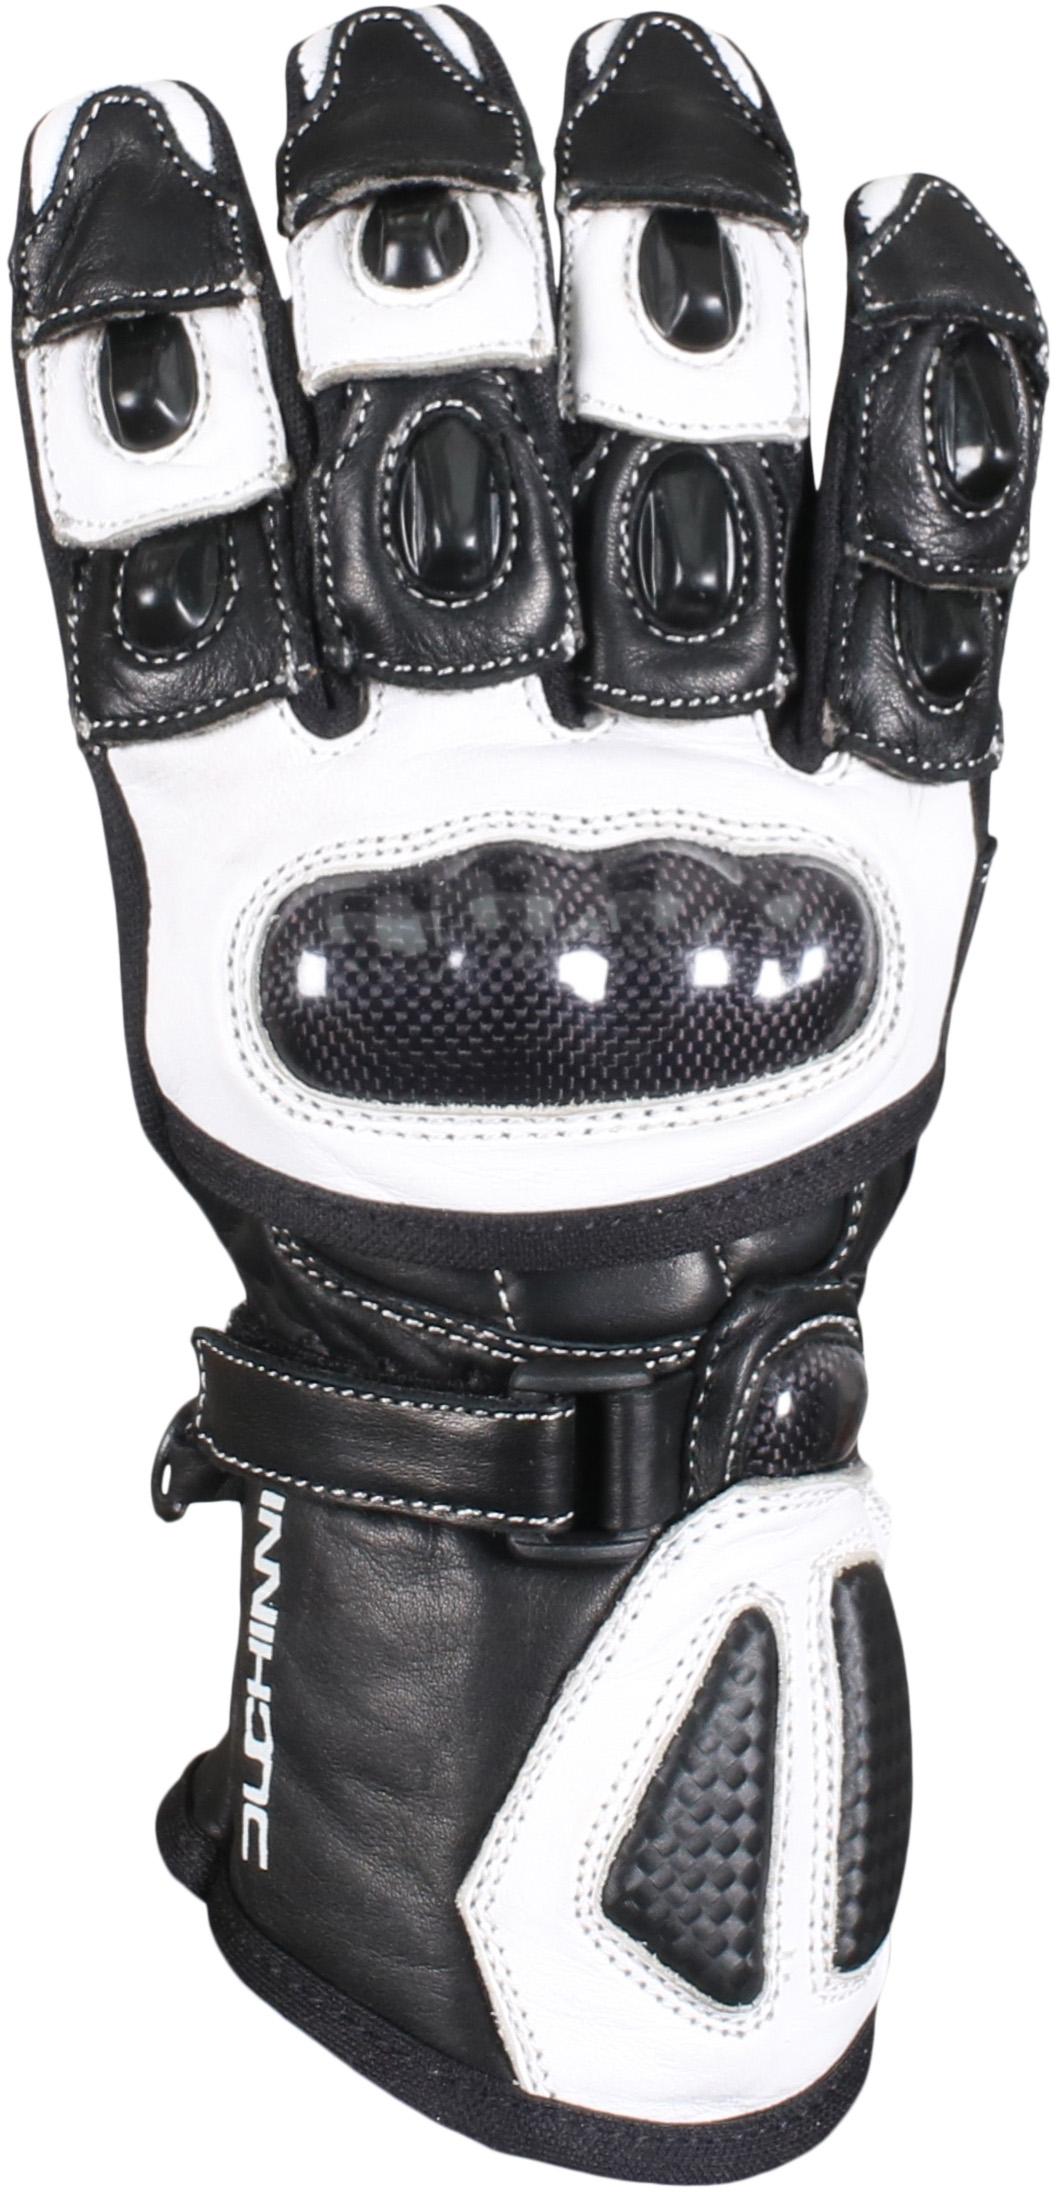 Duchinni Bambino Youth Motorcycle Gloves - Black And White, L